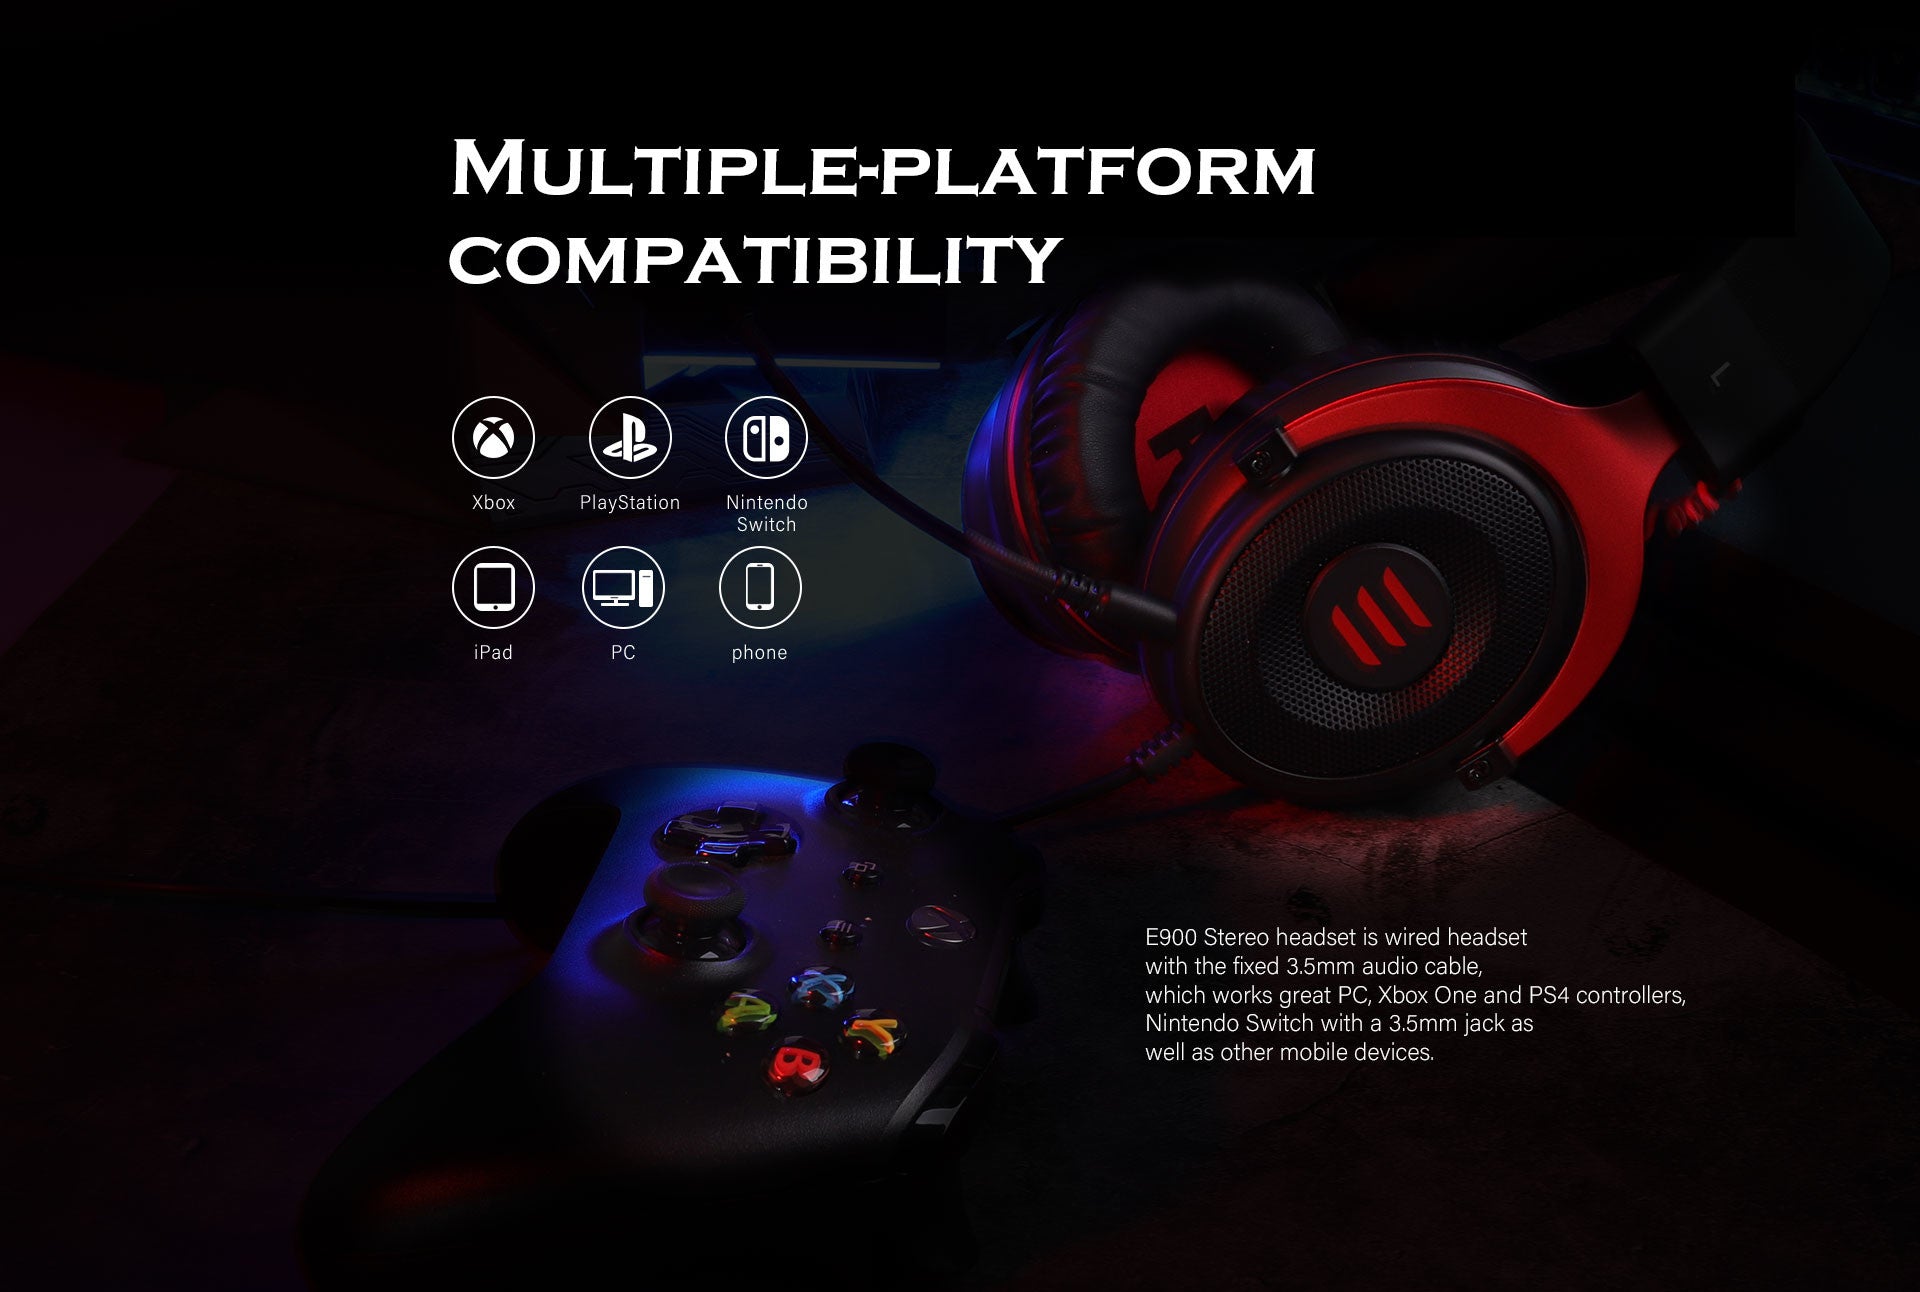 EKSA E900 Stereo Sound Wired Gaming Headset